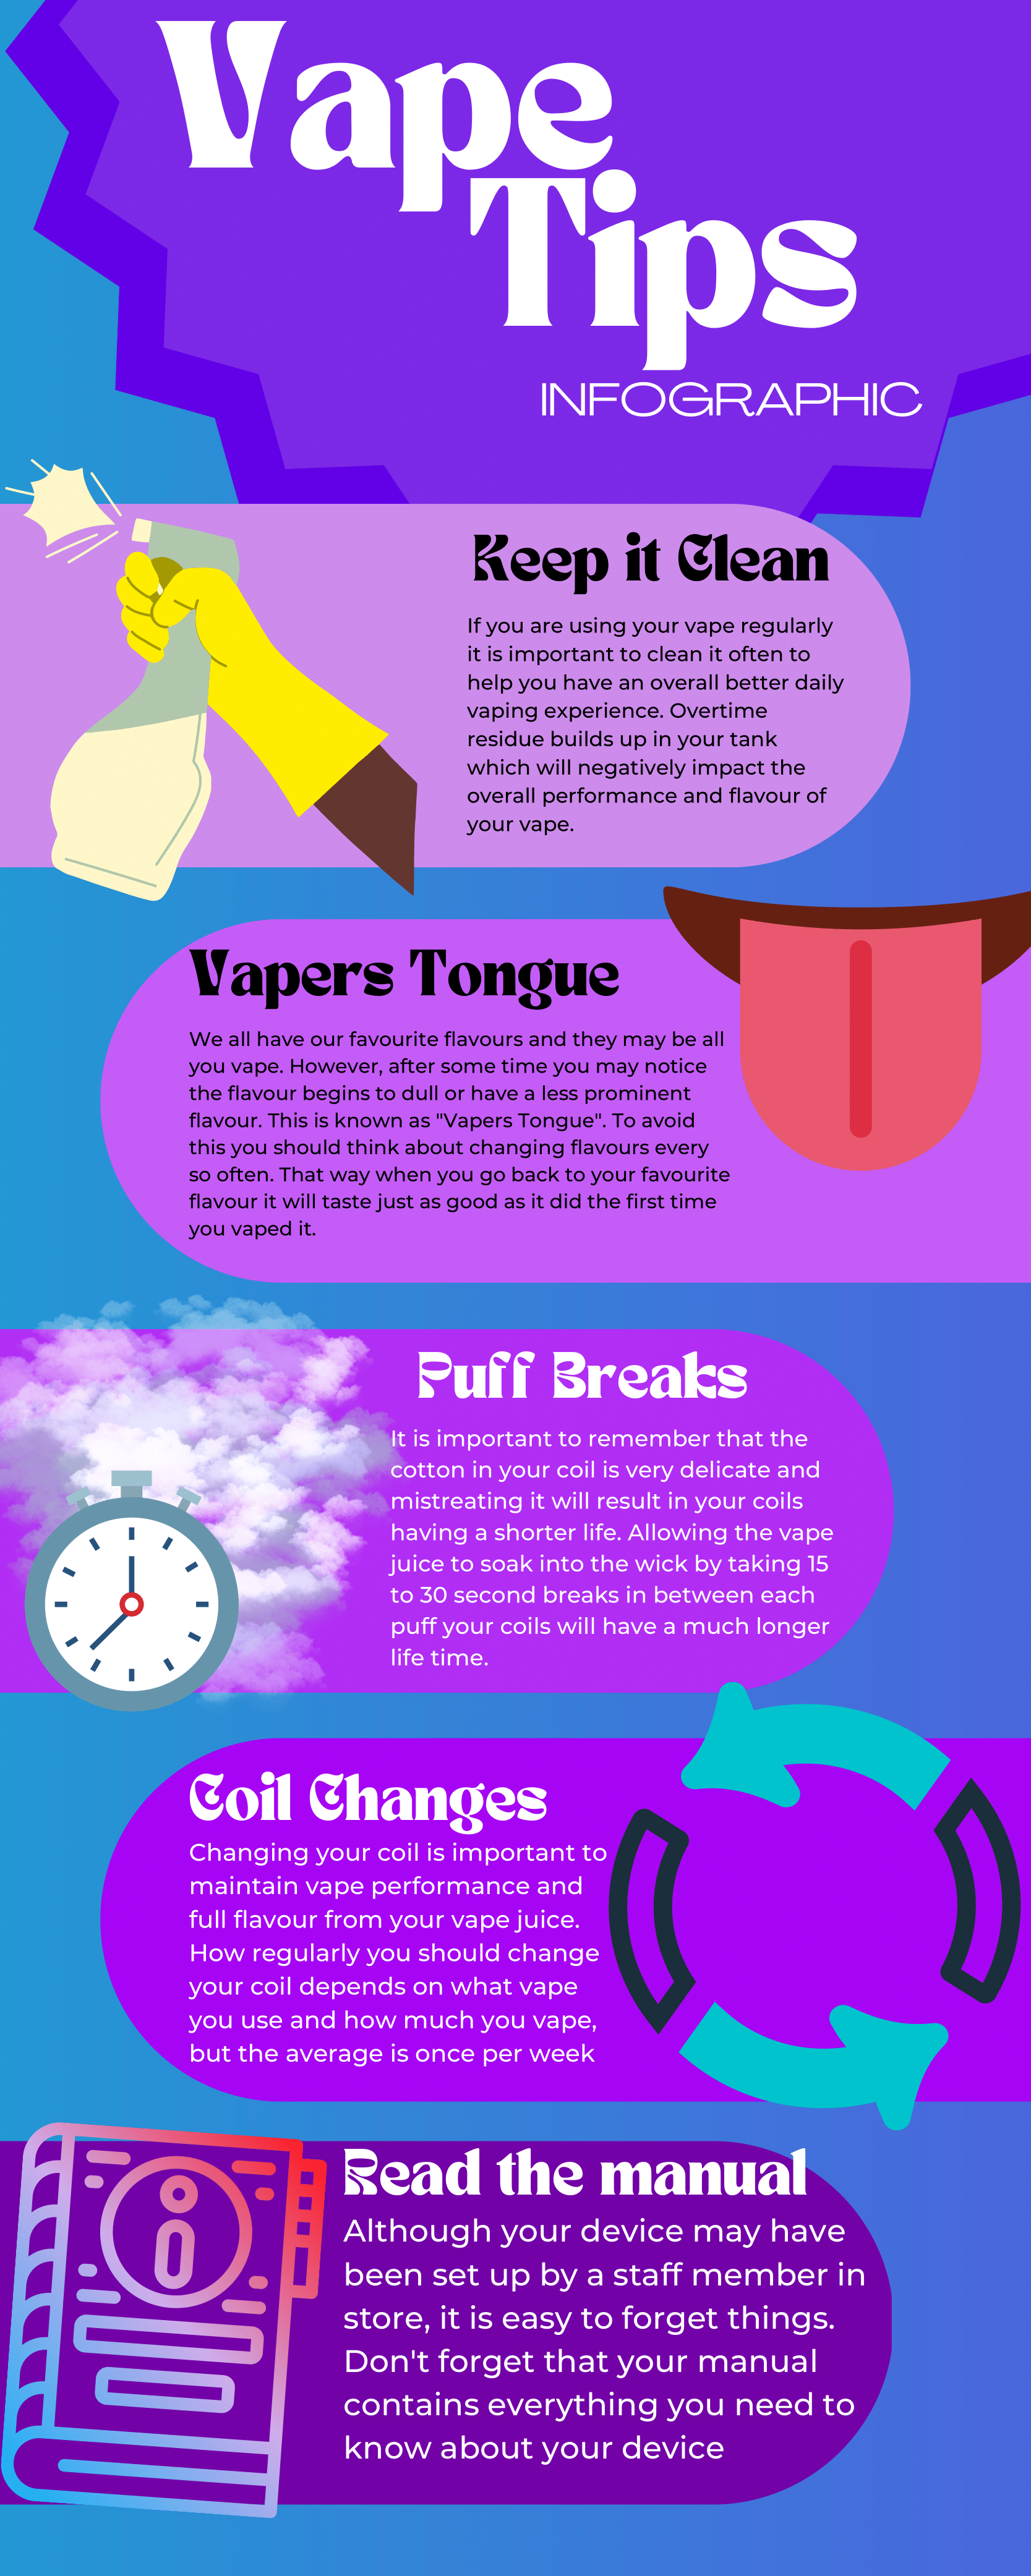 Vape Tips Infographic. Keep it clean. If you are using your vape regularly it is important to clean it often to help you have an overall better daily vaping experience. Overtime residue builds up in your tank which will negatively impact the overall performance and flavour of your vape. Vapers Tongue. We all have our favourite flavours and the may be all you vape. However, after some time you may notice the flavour begins to dull or have a less prominent flavour. This is known as 